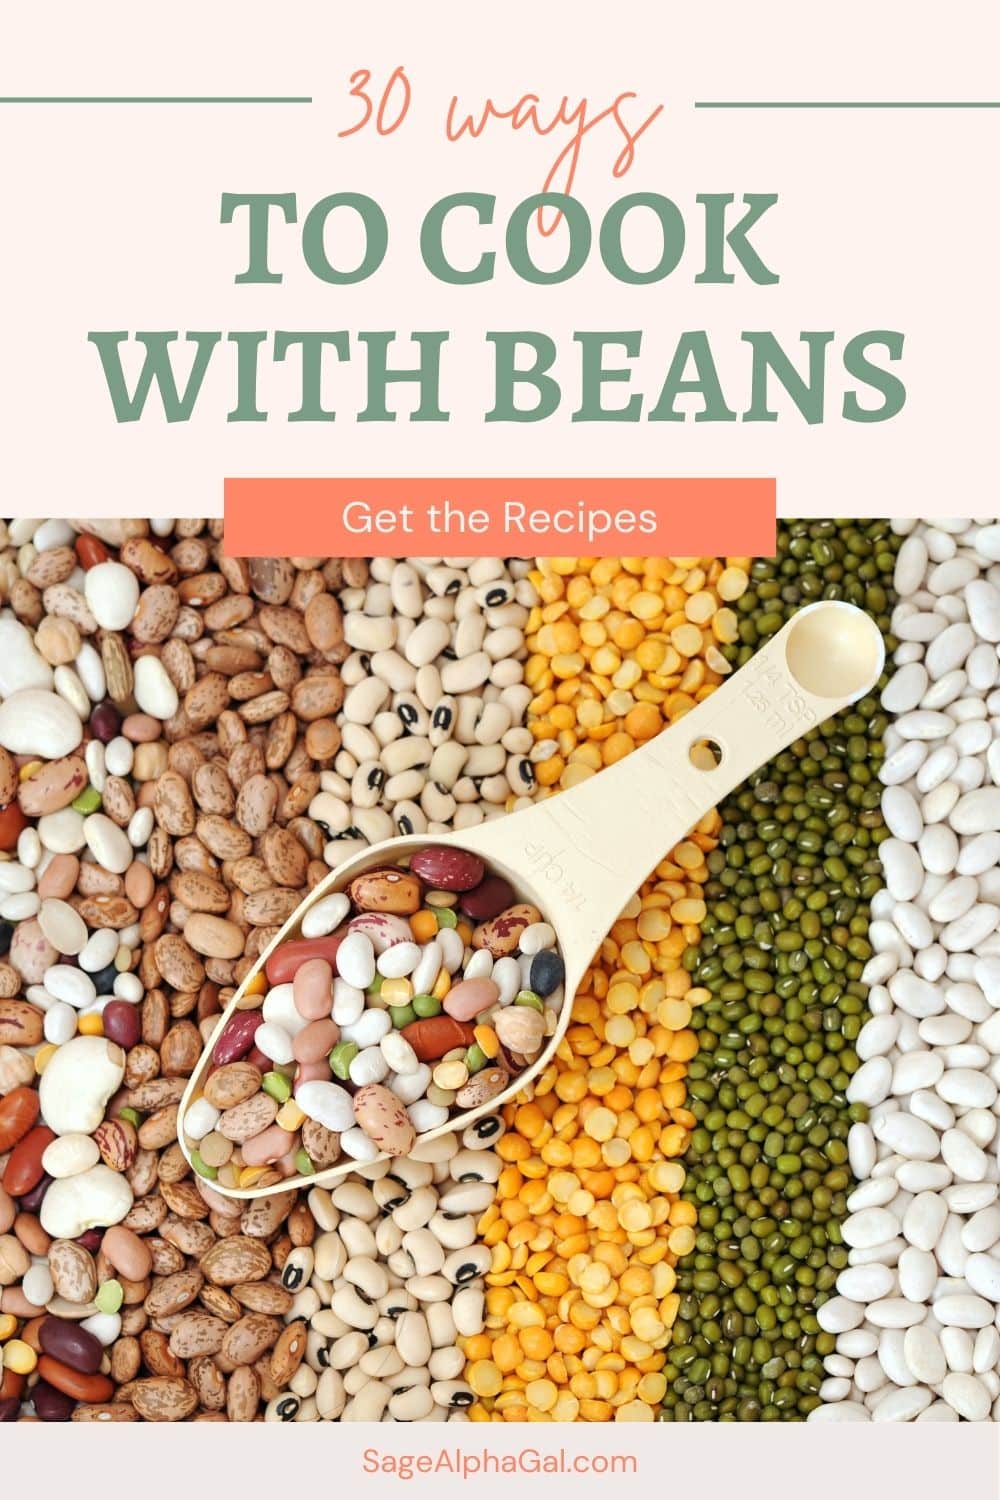 Best Beans For Protein Pin 1 JPG 